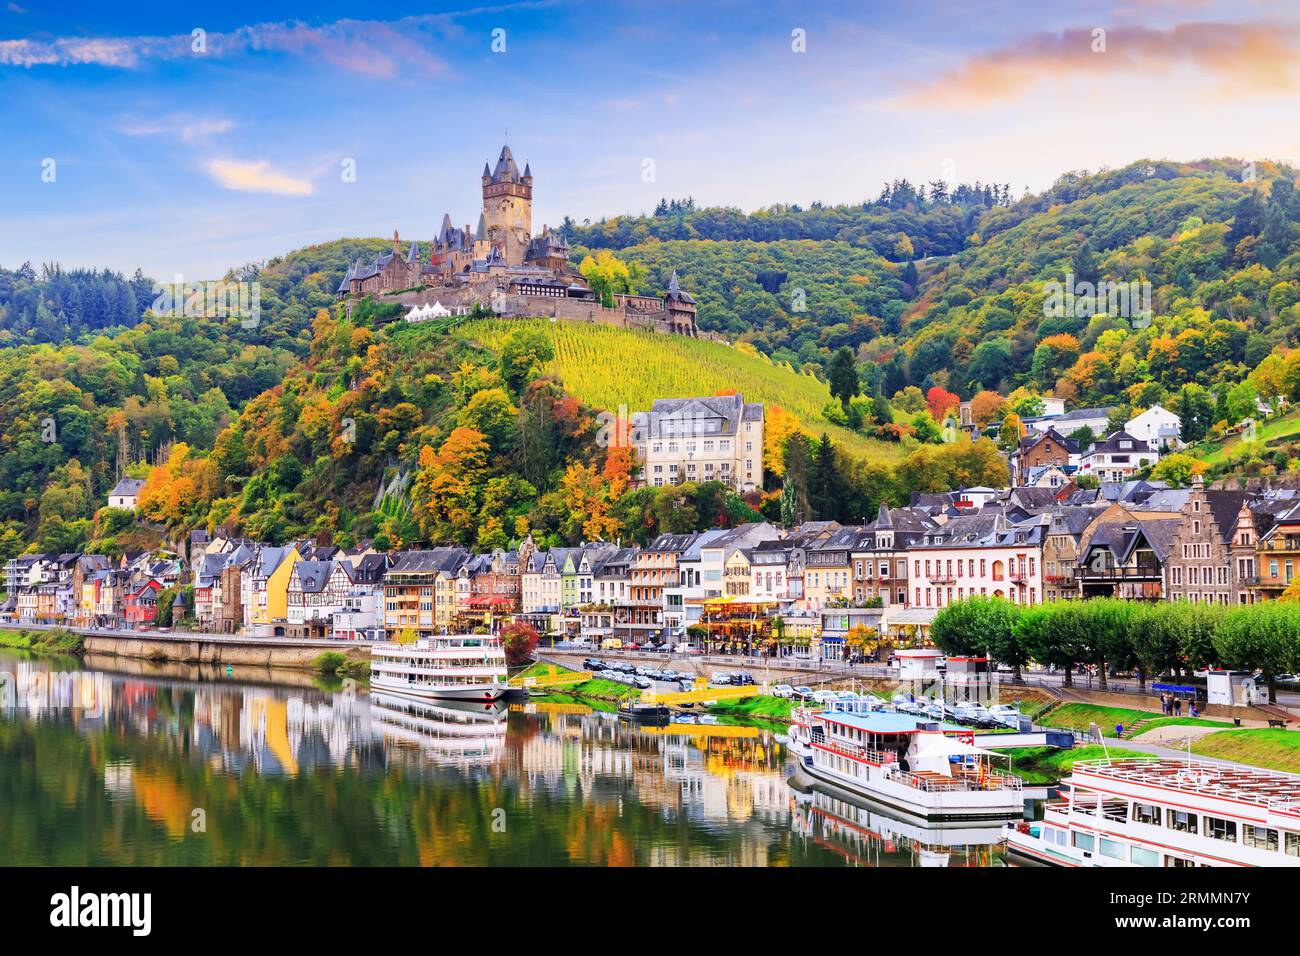 Cochem, Germany. Old town and the Cochem (Reichsburg) castle on the Moselle river. Stock Photo